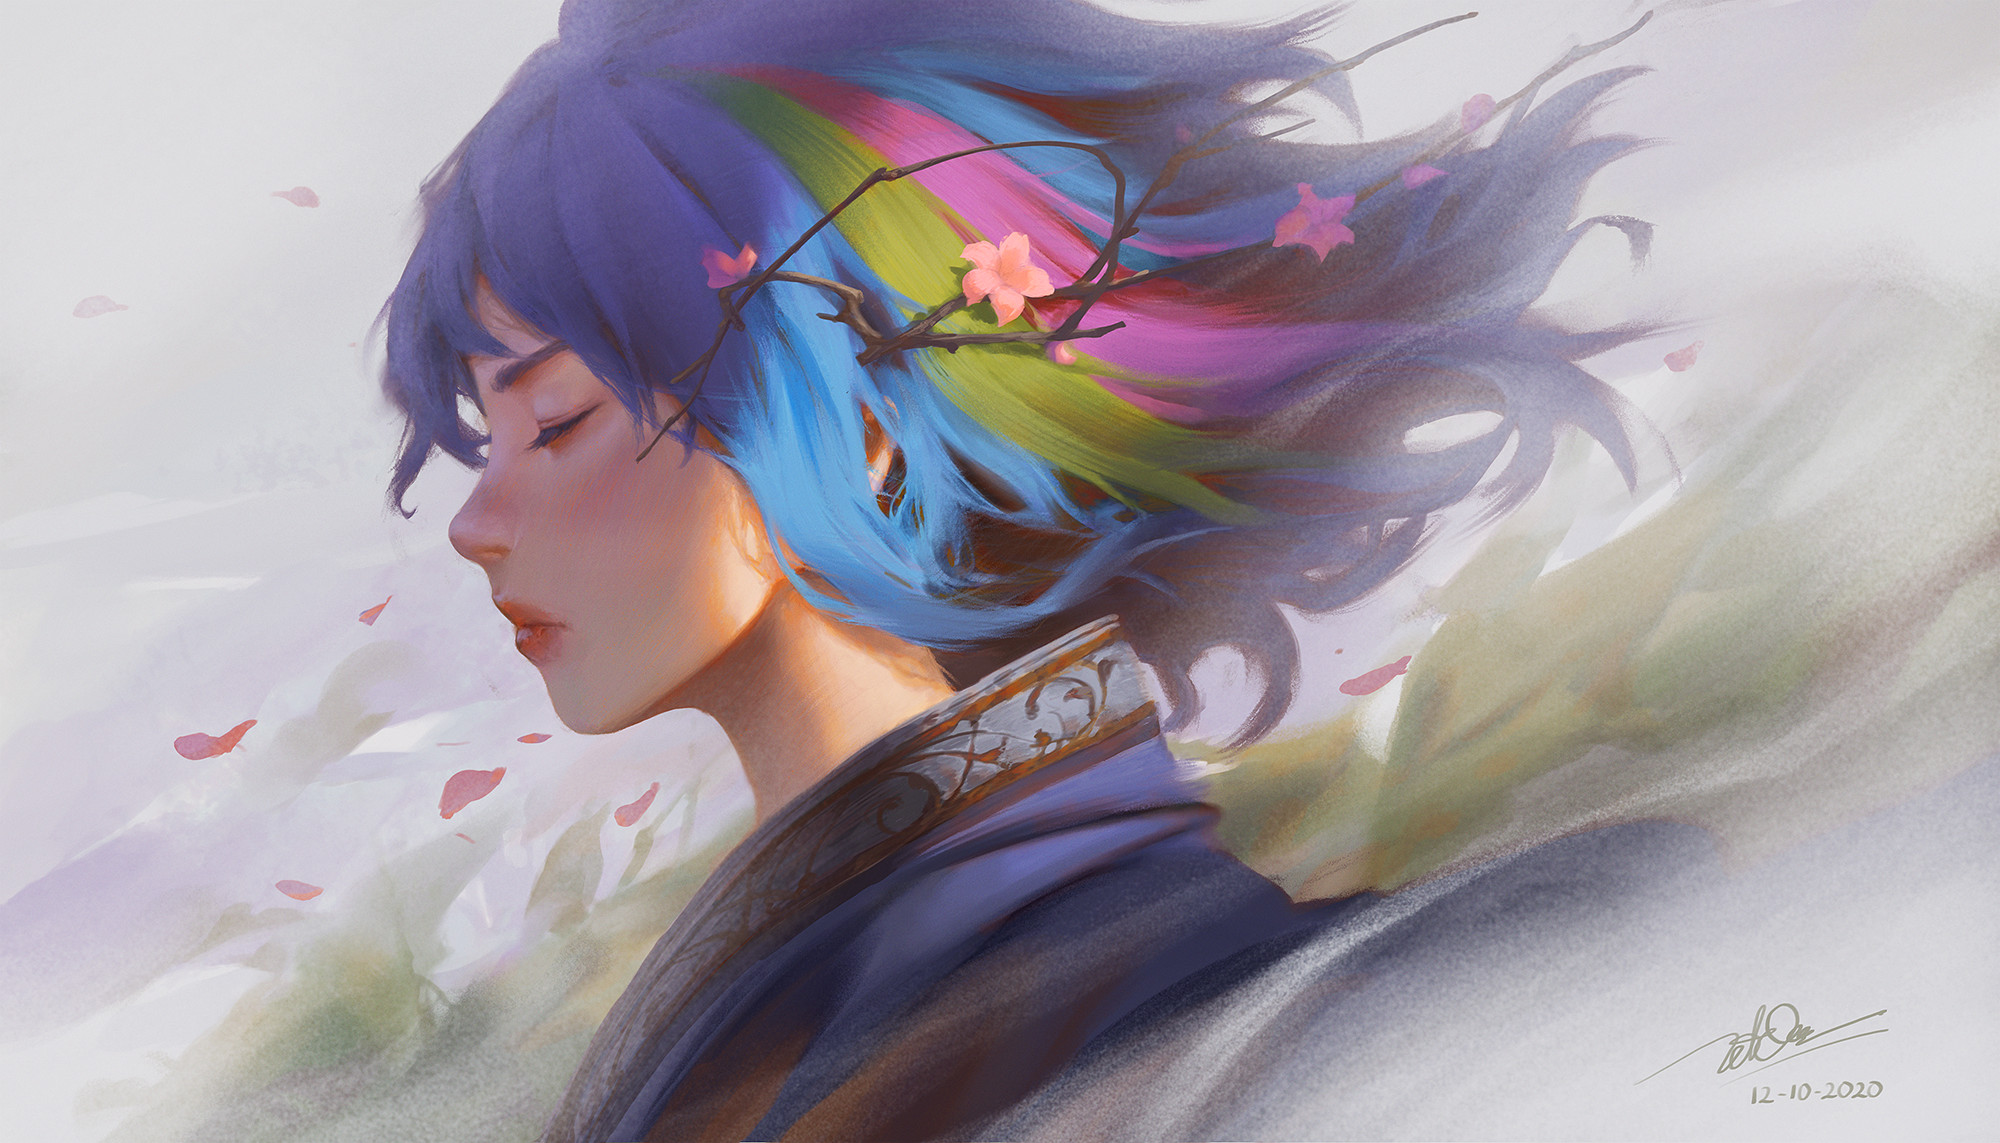 General 2000x1143 artwork women closed eyes colorful fantasy art fantasy girl face profile 2020 (Year) Dao Trong Le painting